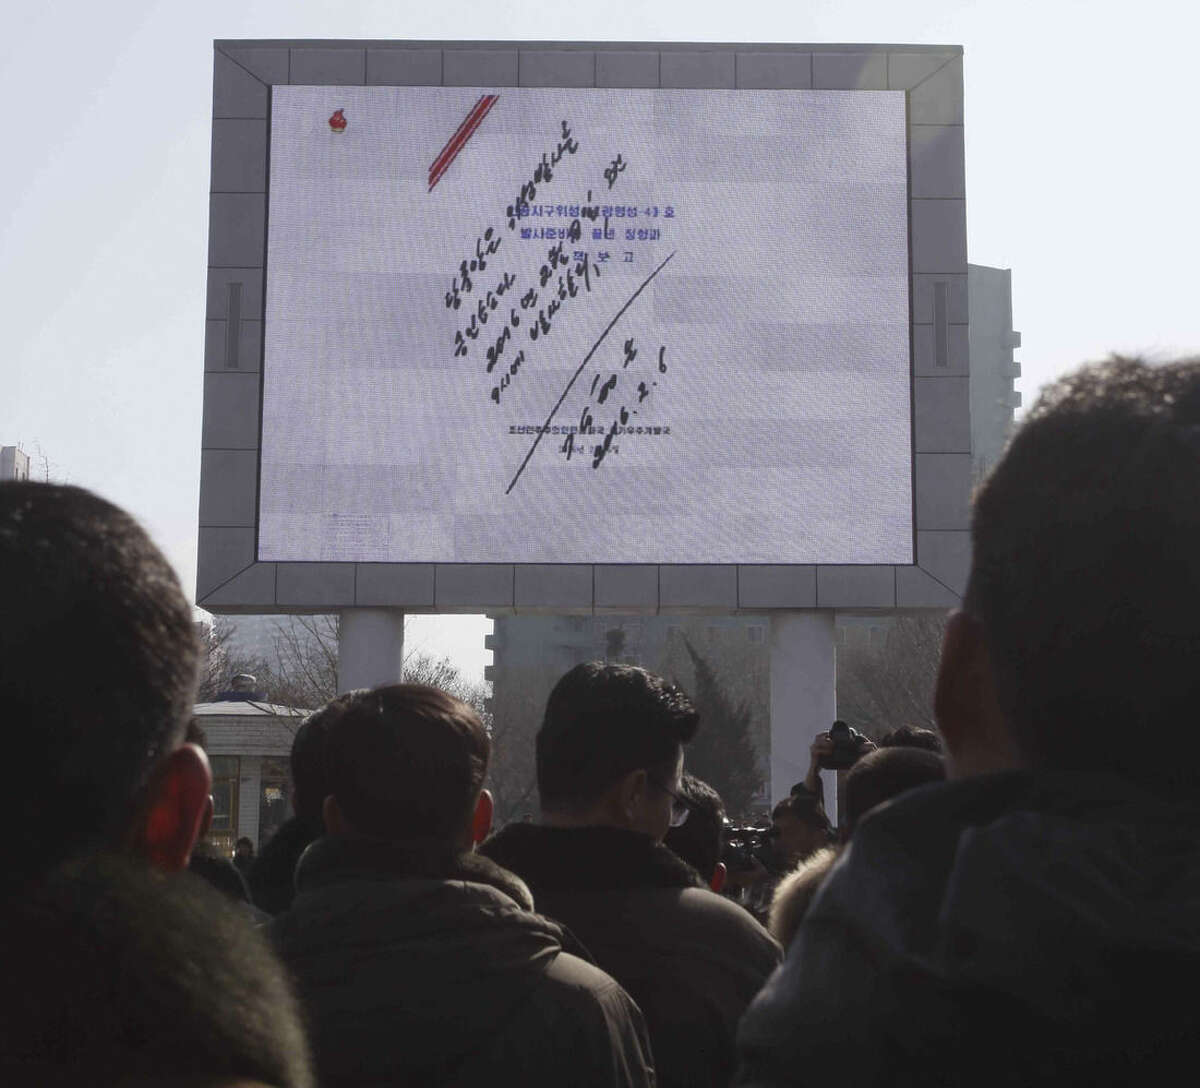 North Koreans watch an electronic screen showing a signed document by North Korean leader Kim Jong Un regarding the launch of a satellite on Sunday, Feb. 7, 2016, at the Pyongyang Railway Station in Pyongyang, North Korea. North Korea on Sunday defied international warnings and launched a long-range rocket that the United Nations and others call a cover for a banned test of technology for a missile that could strike the U.S. mainland. (AP Photo/Kim Kwang Hyon)